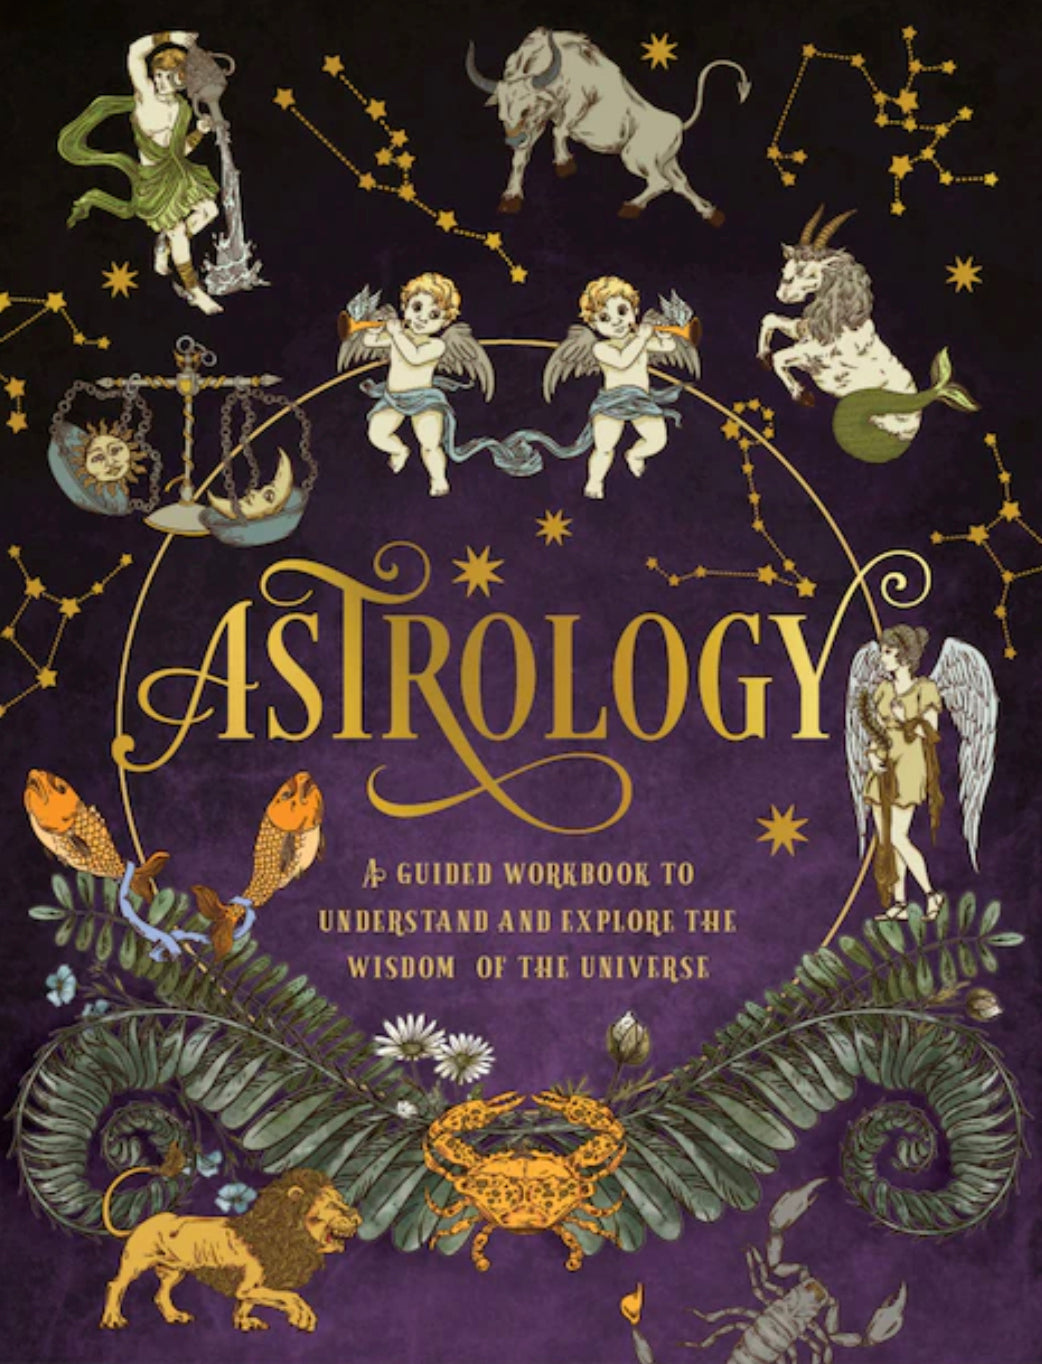 Astrology: A Guided Workbook: Understand And Explore The Wisdom Of The Universe